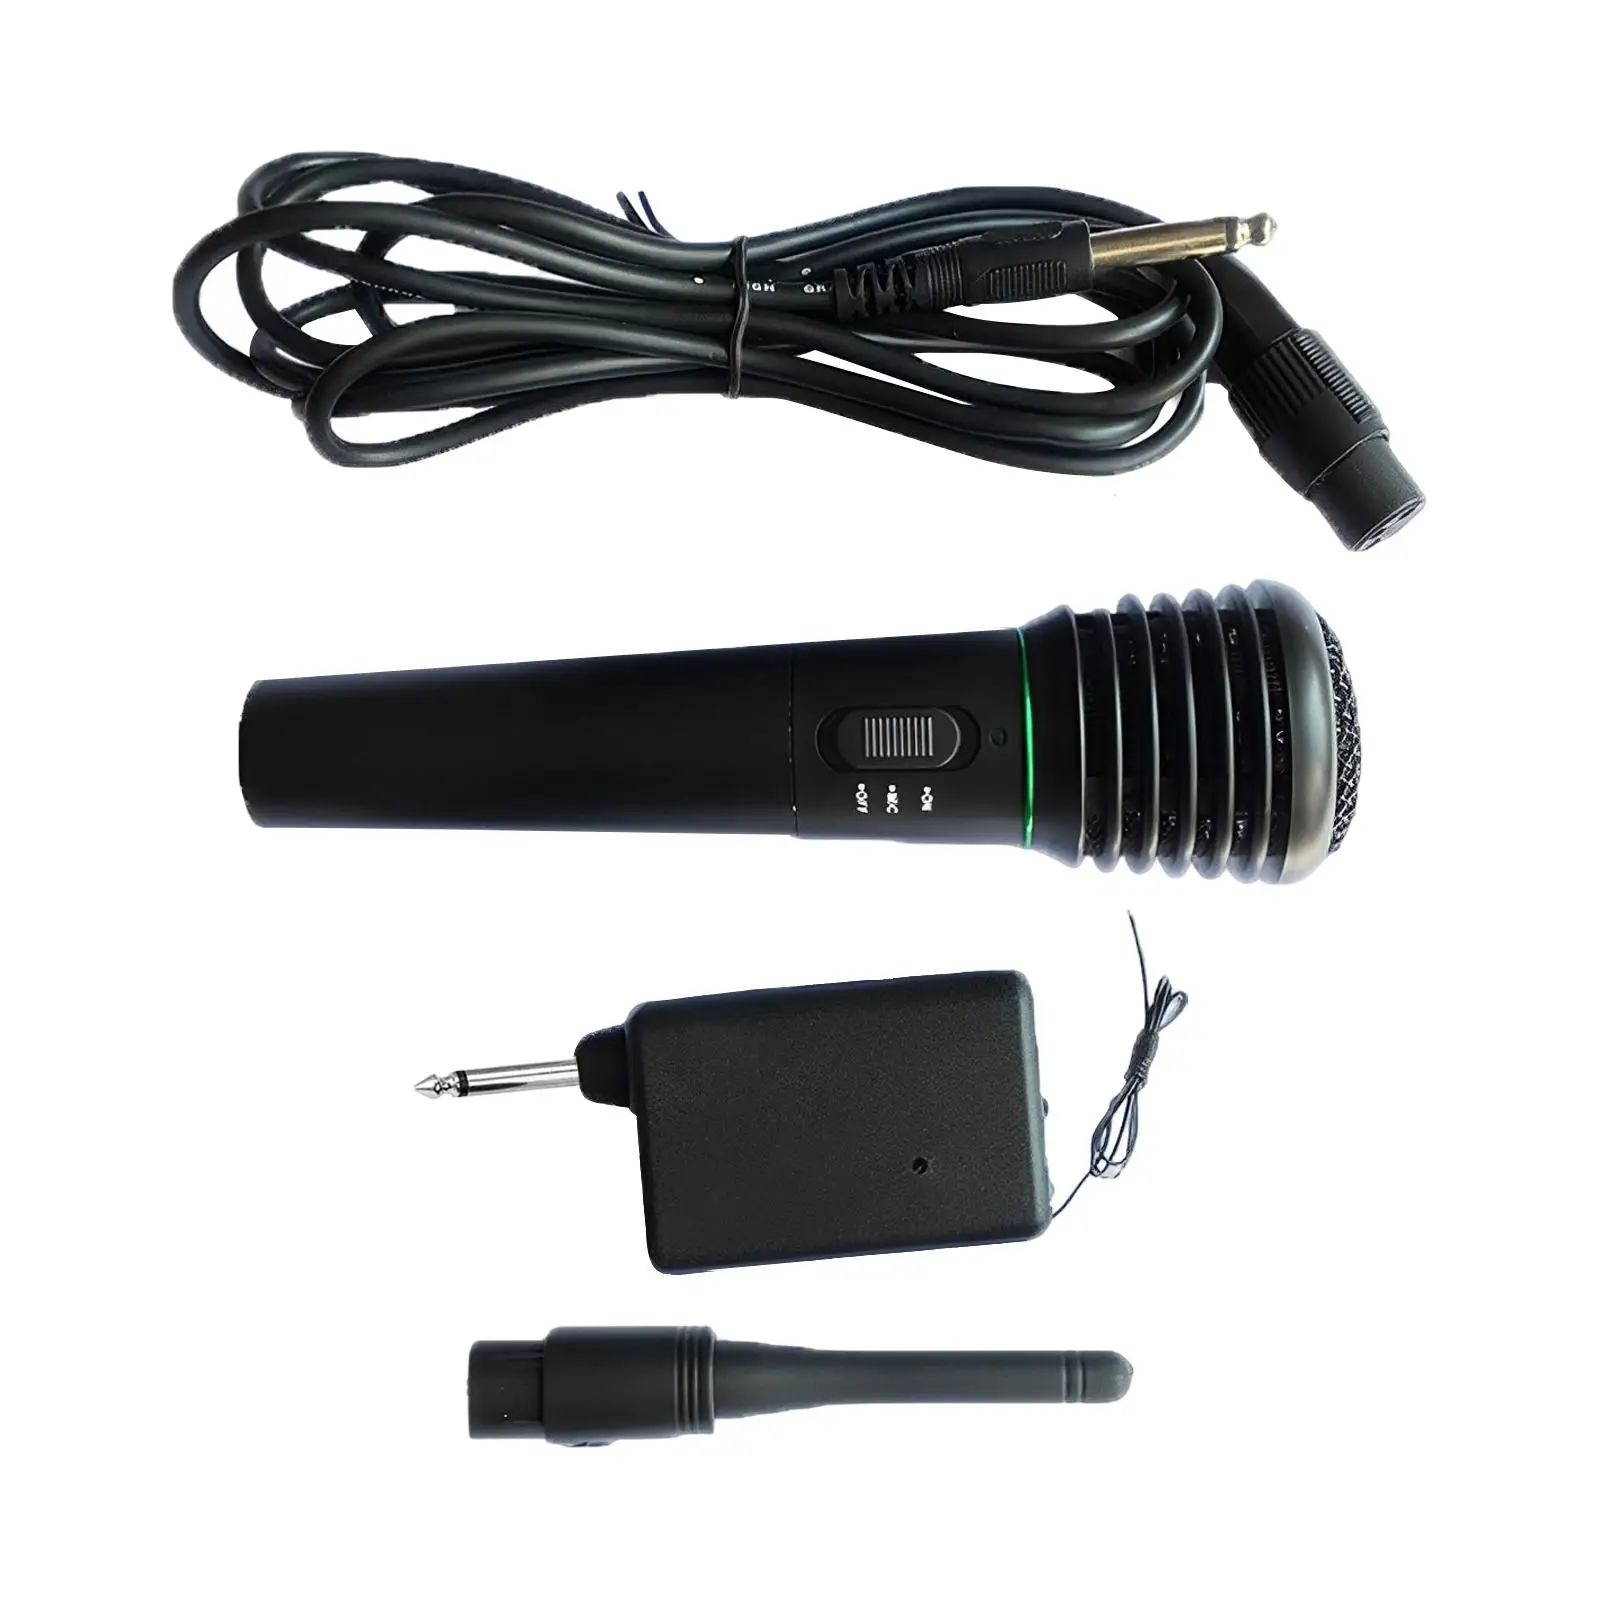 Handheld Cordless Dynamic Mic 2 in 1 with Receiver Vocal Microphone Wired Microphone for Audio Home KTV Tablet Computer Laptop